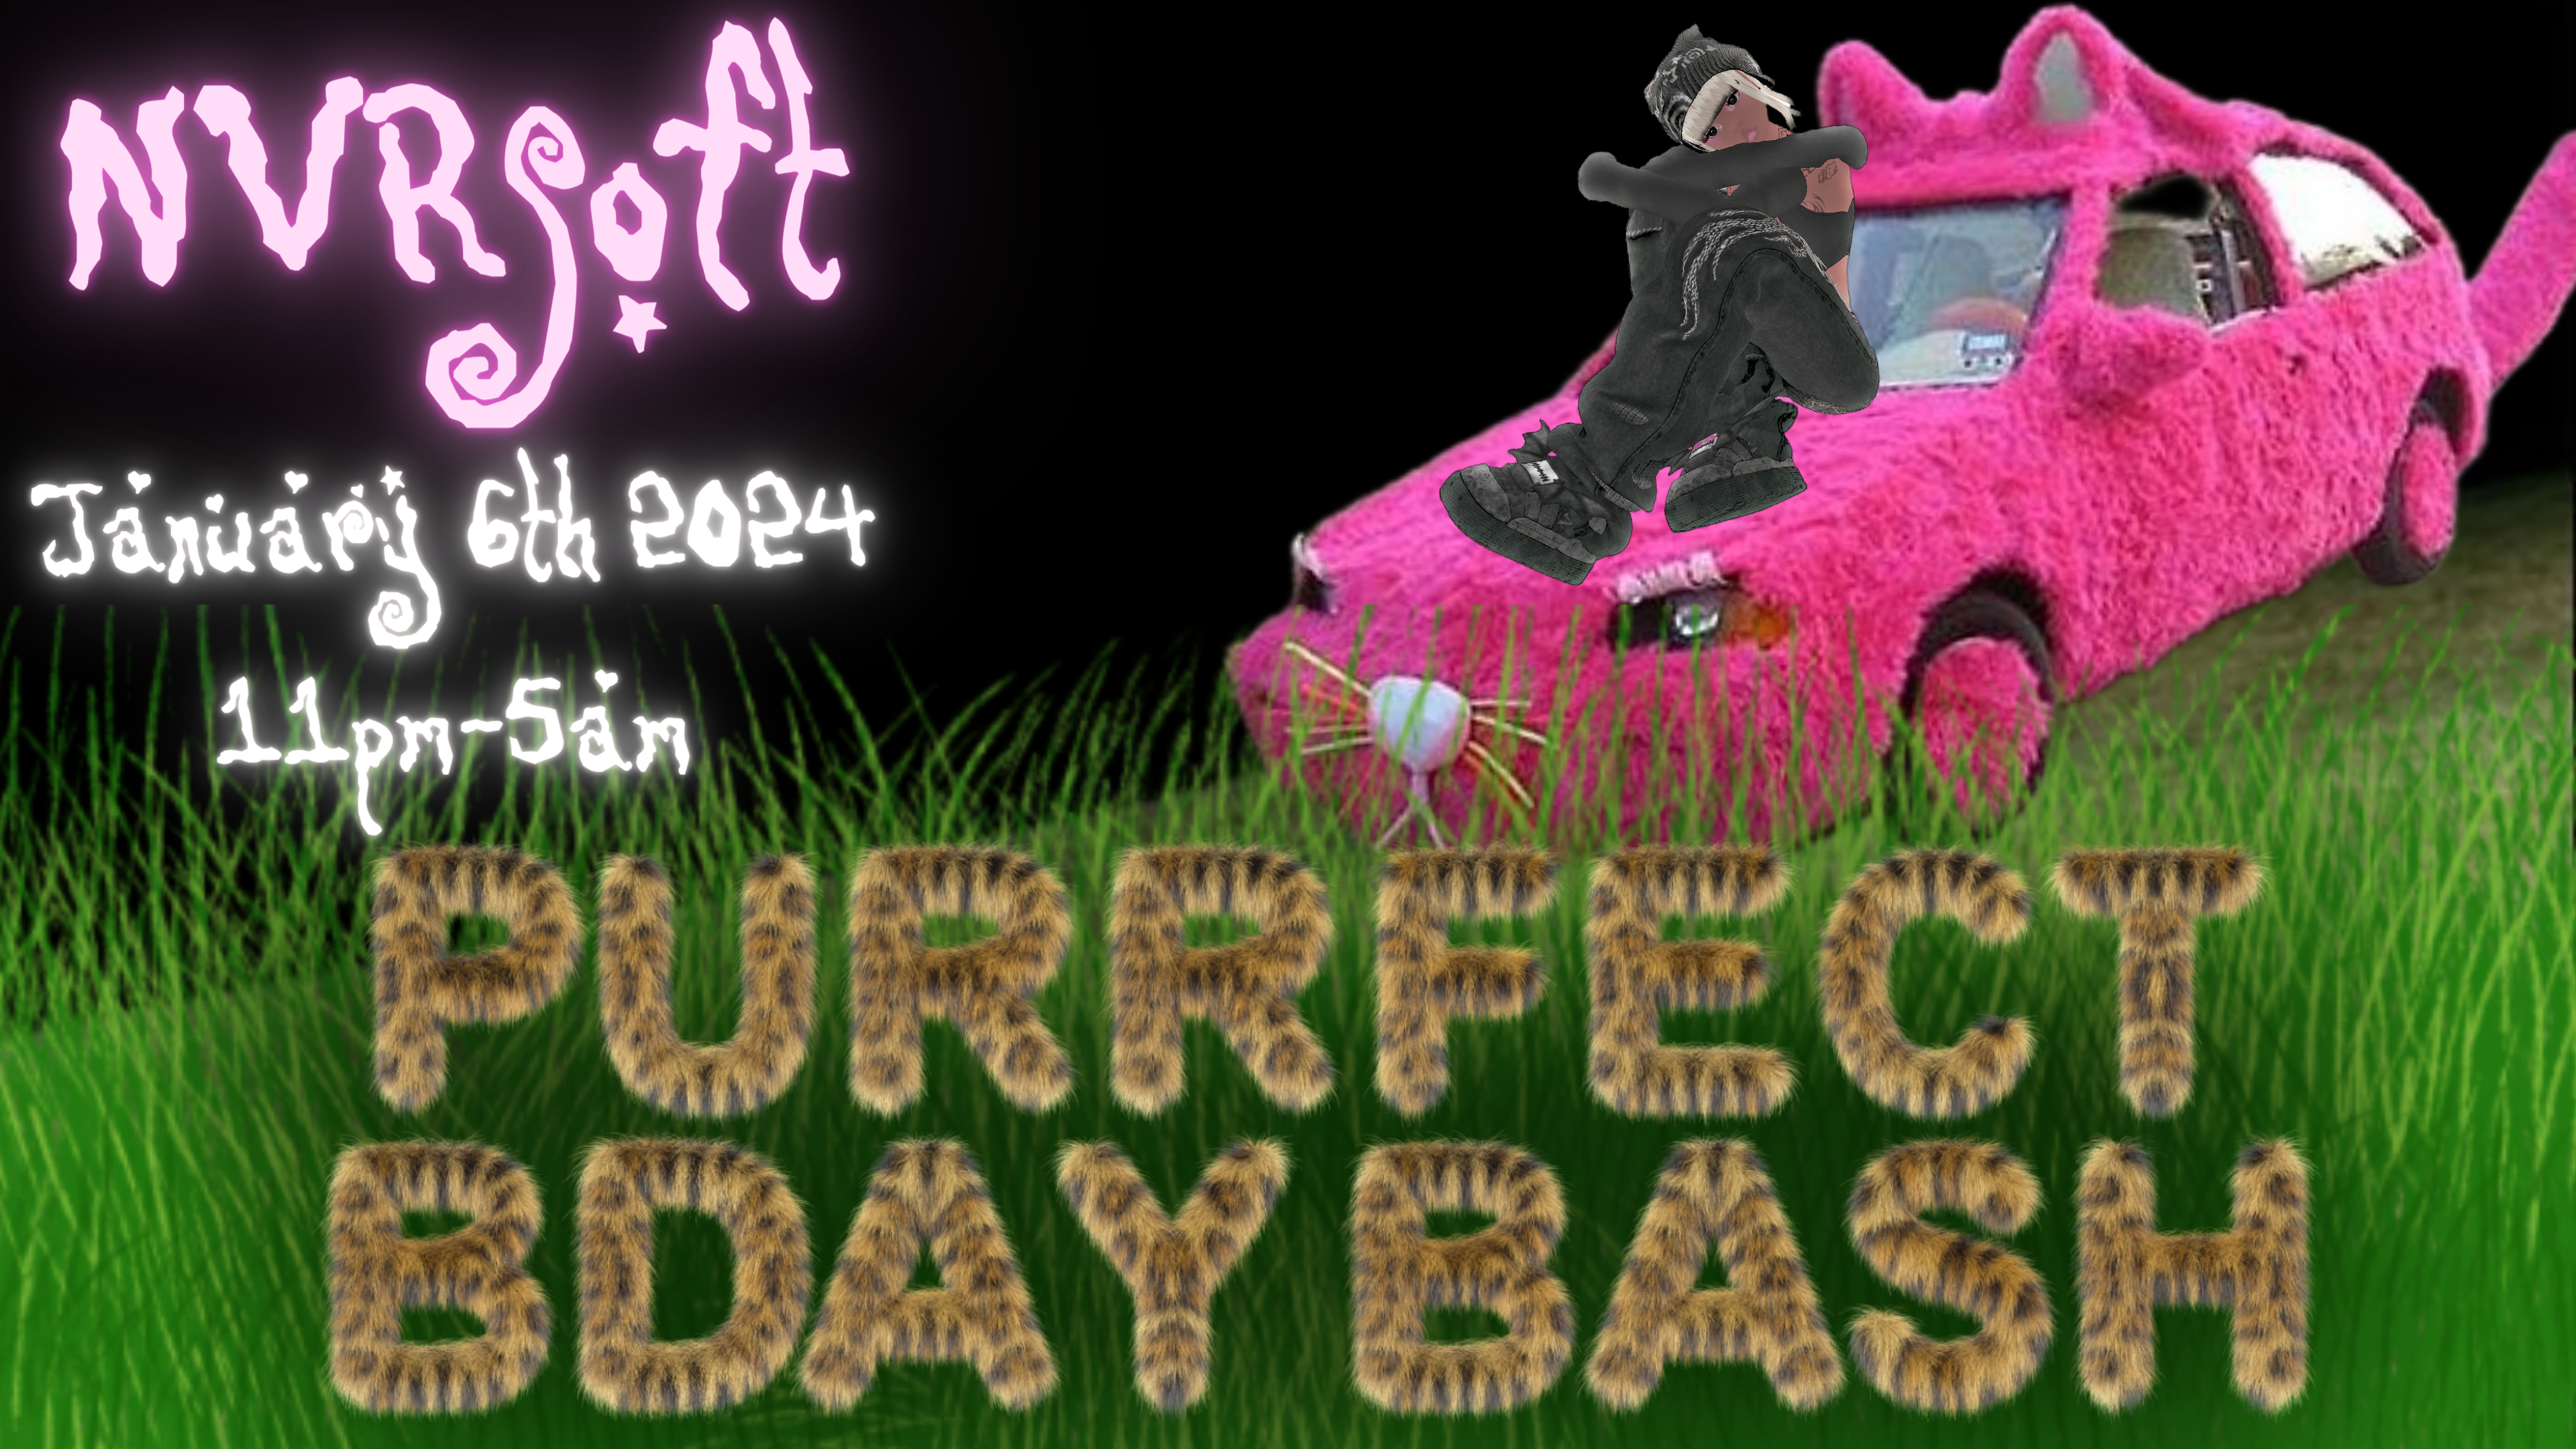 Purrfect Bday Bash with Nvrsoft - Página frontal